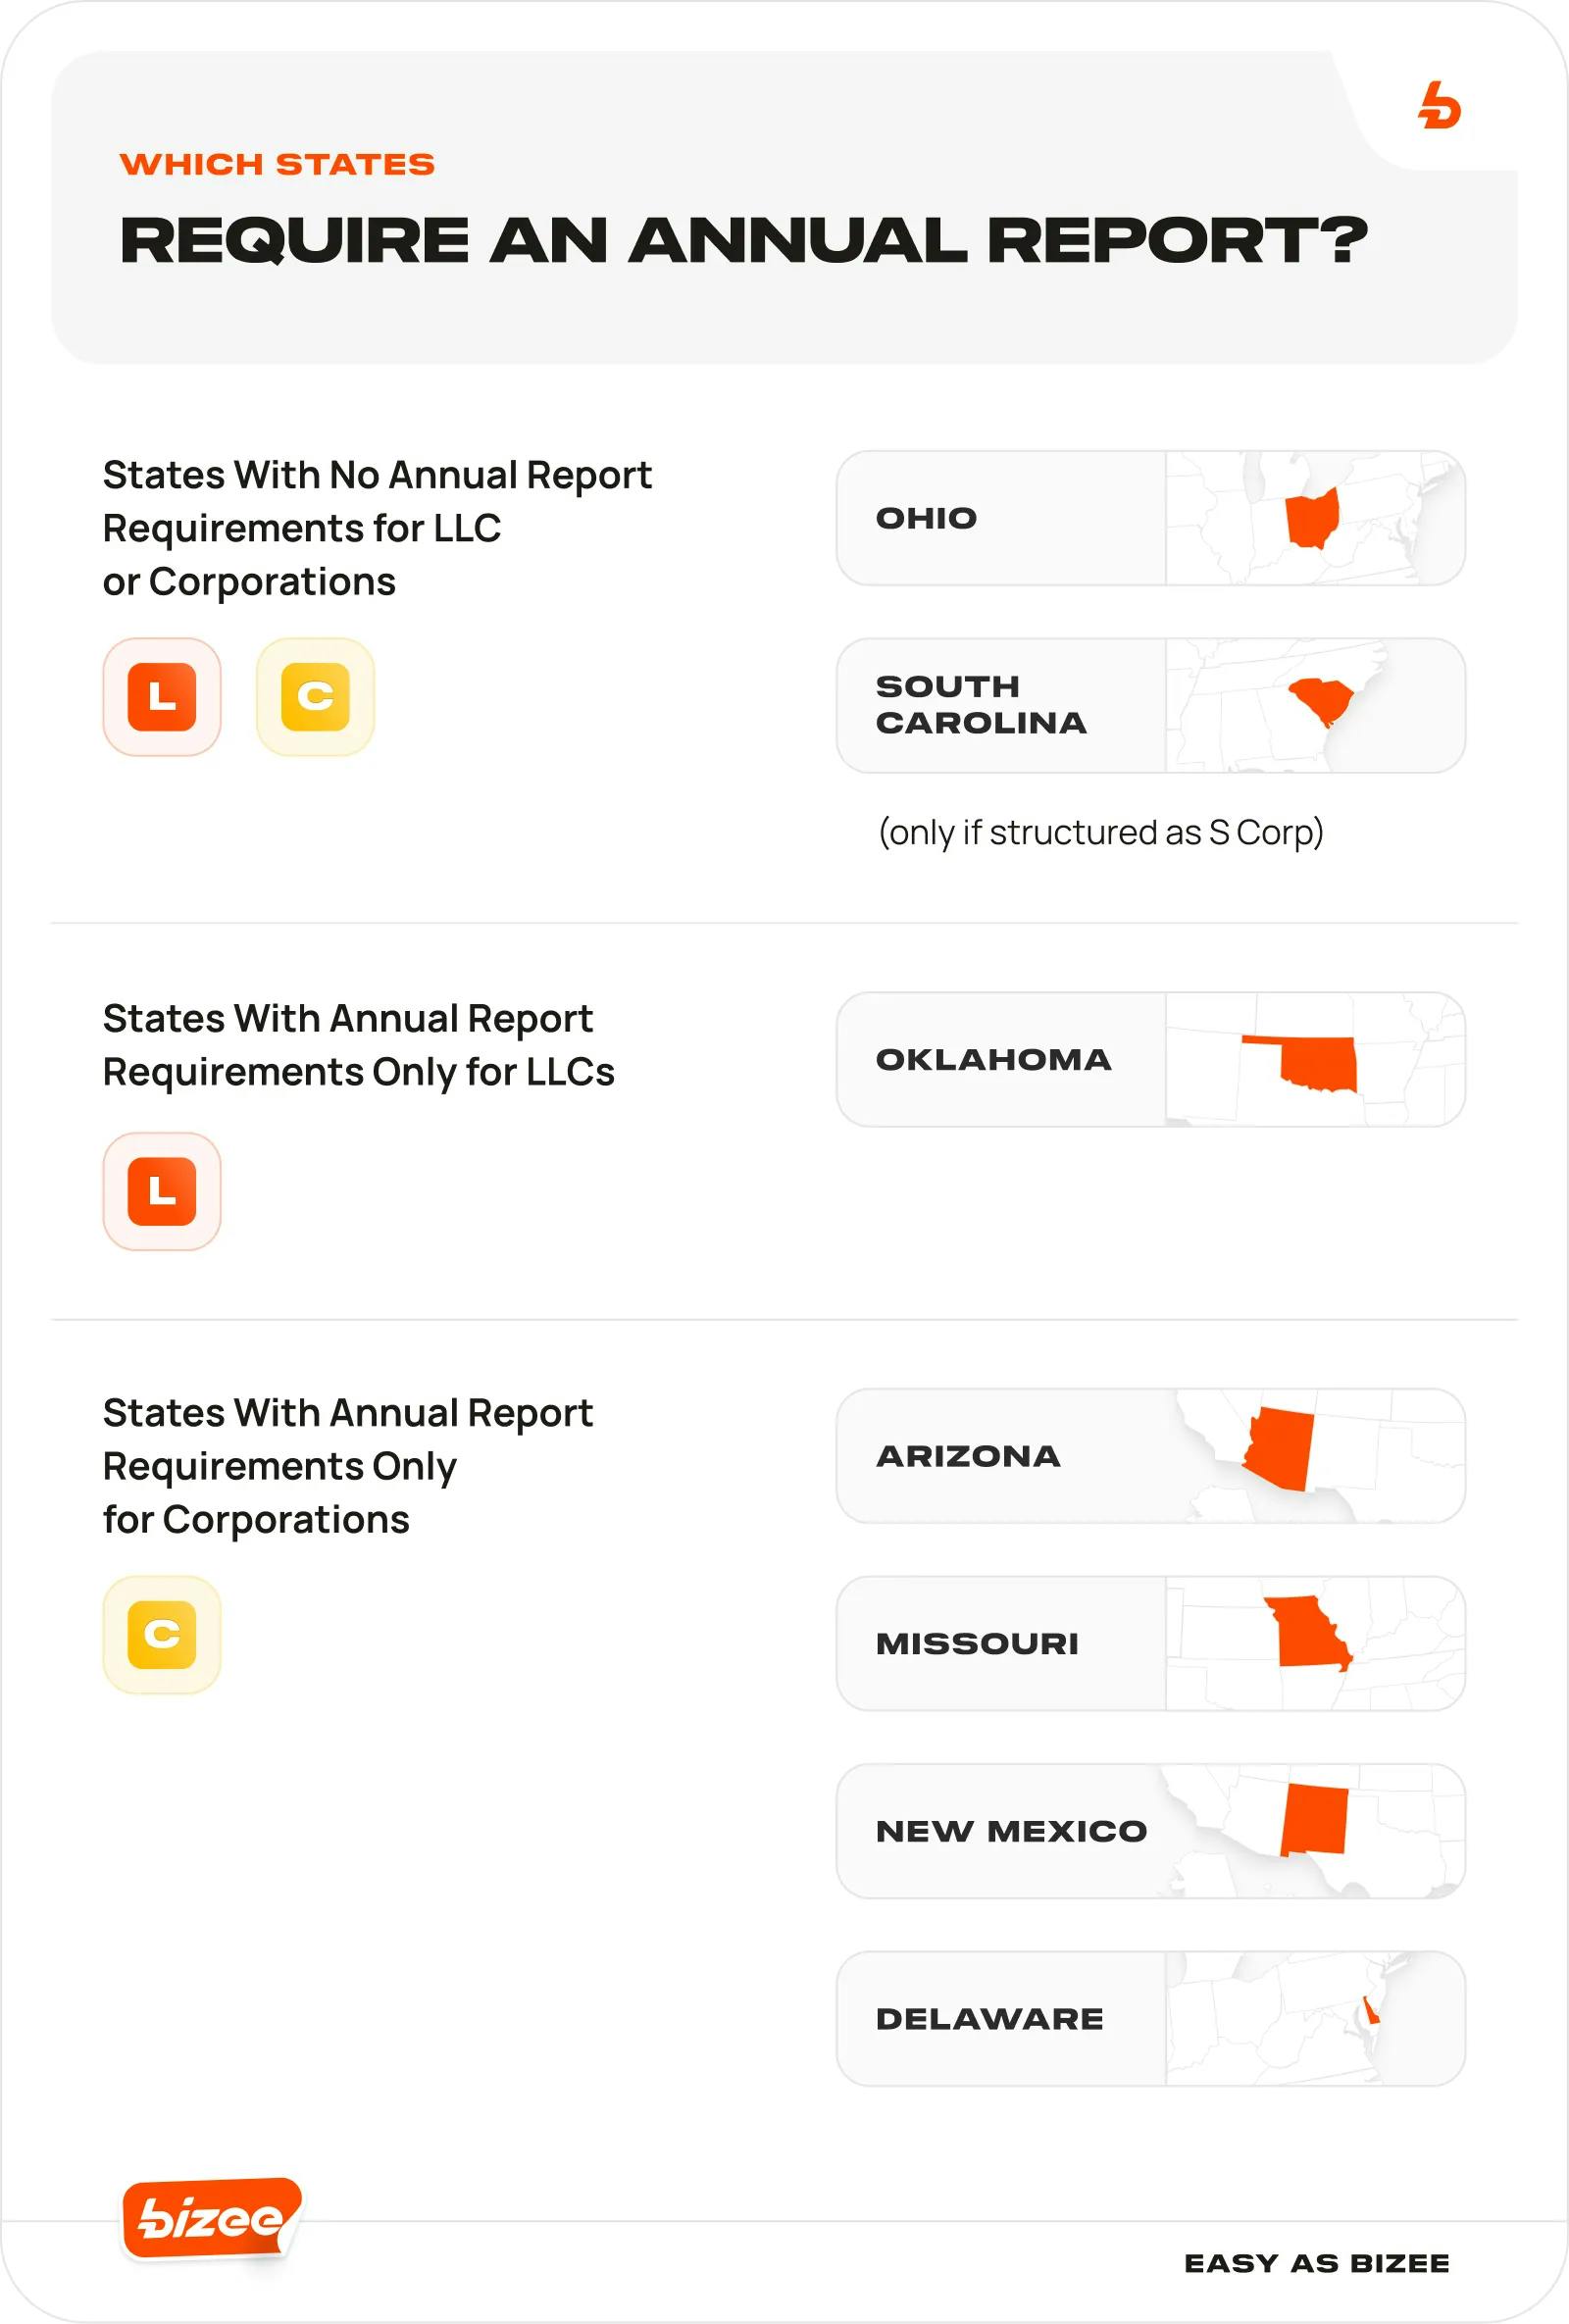 Which states require an annual report